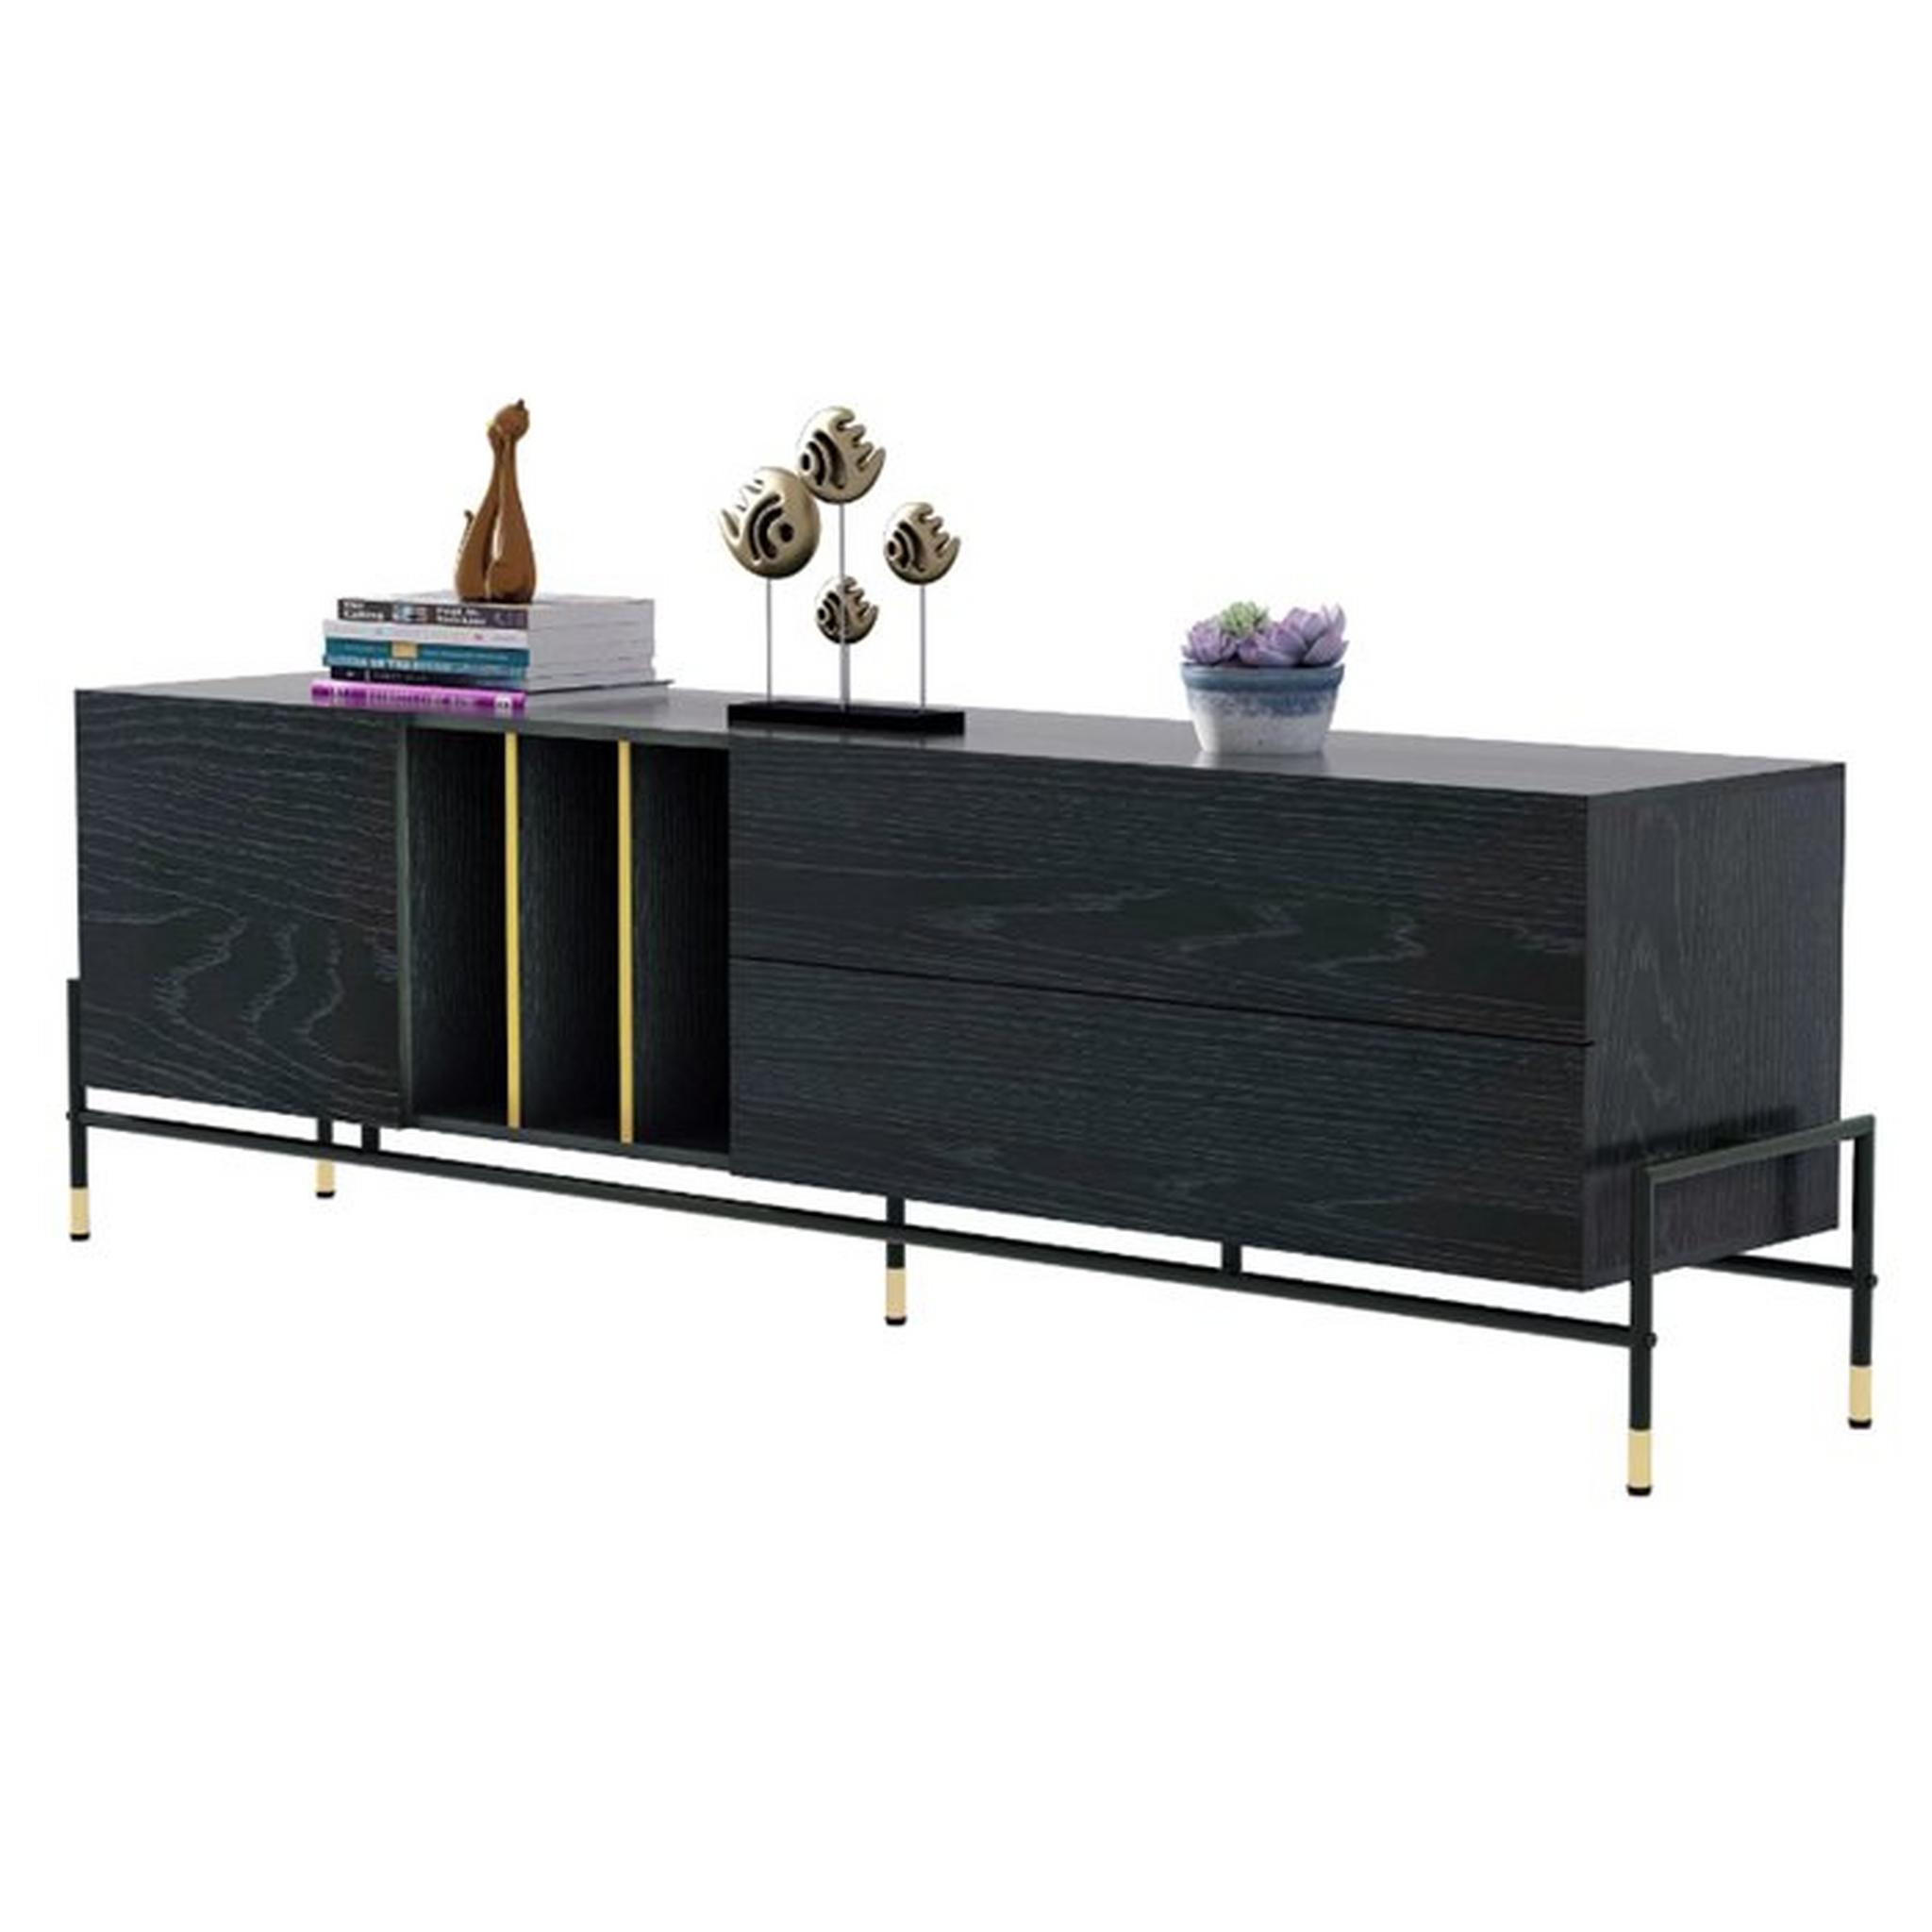 Wansa TV Stand, Up to 75-inch, 75Kg Loading Capacity, KS-BR-0220 - Black